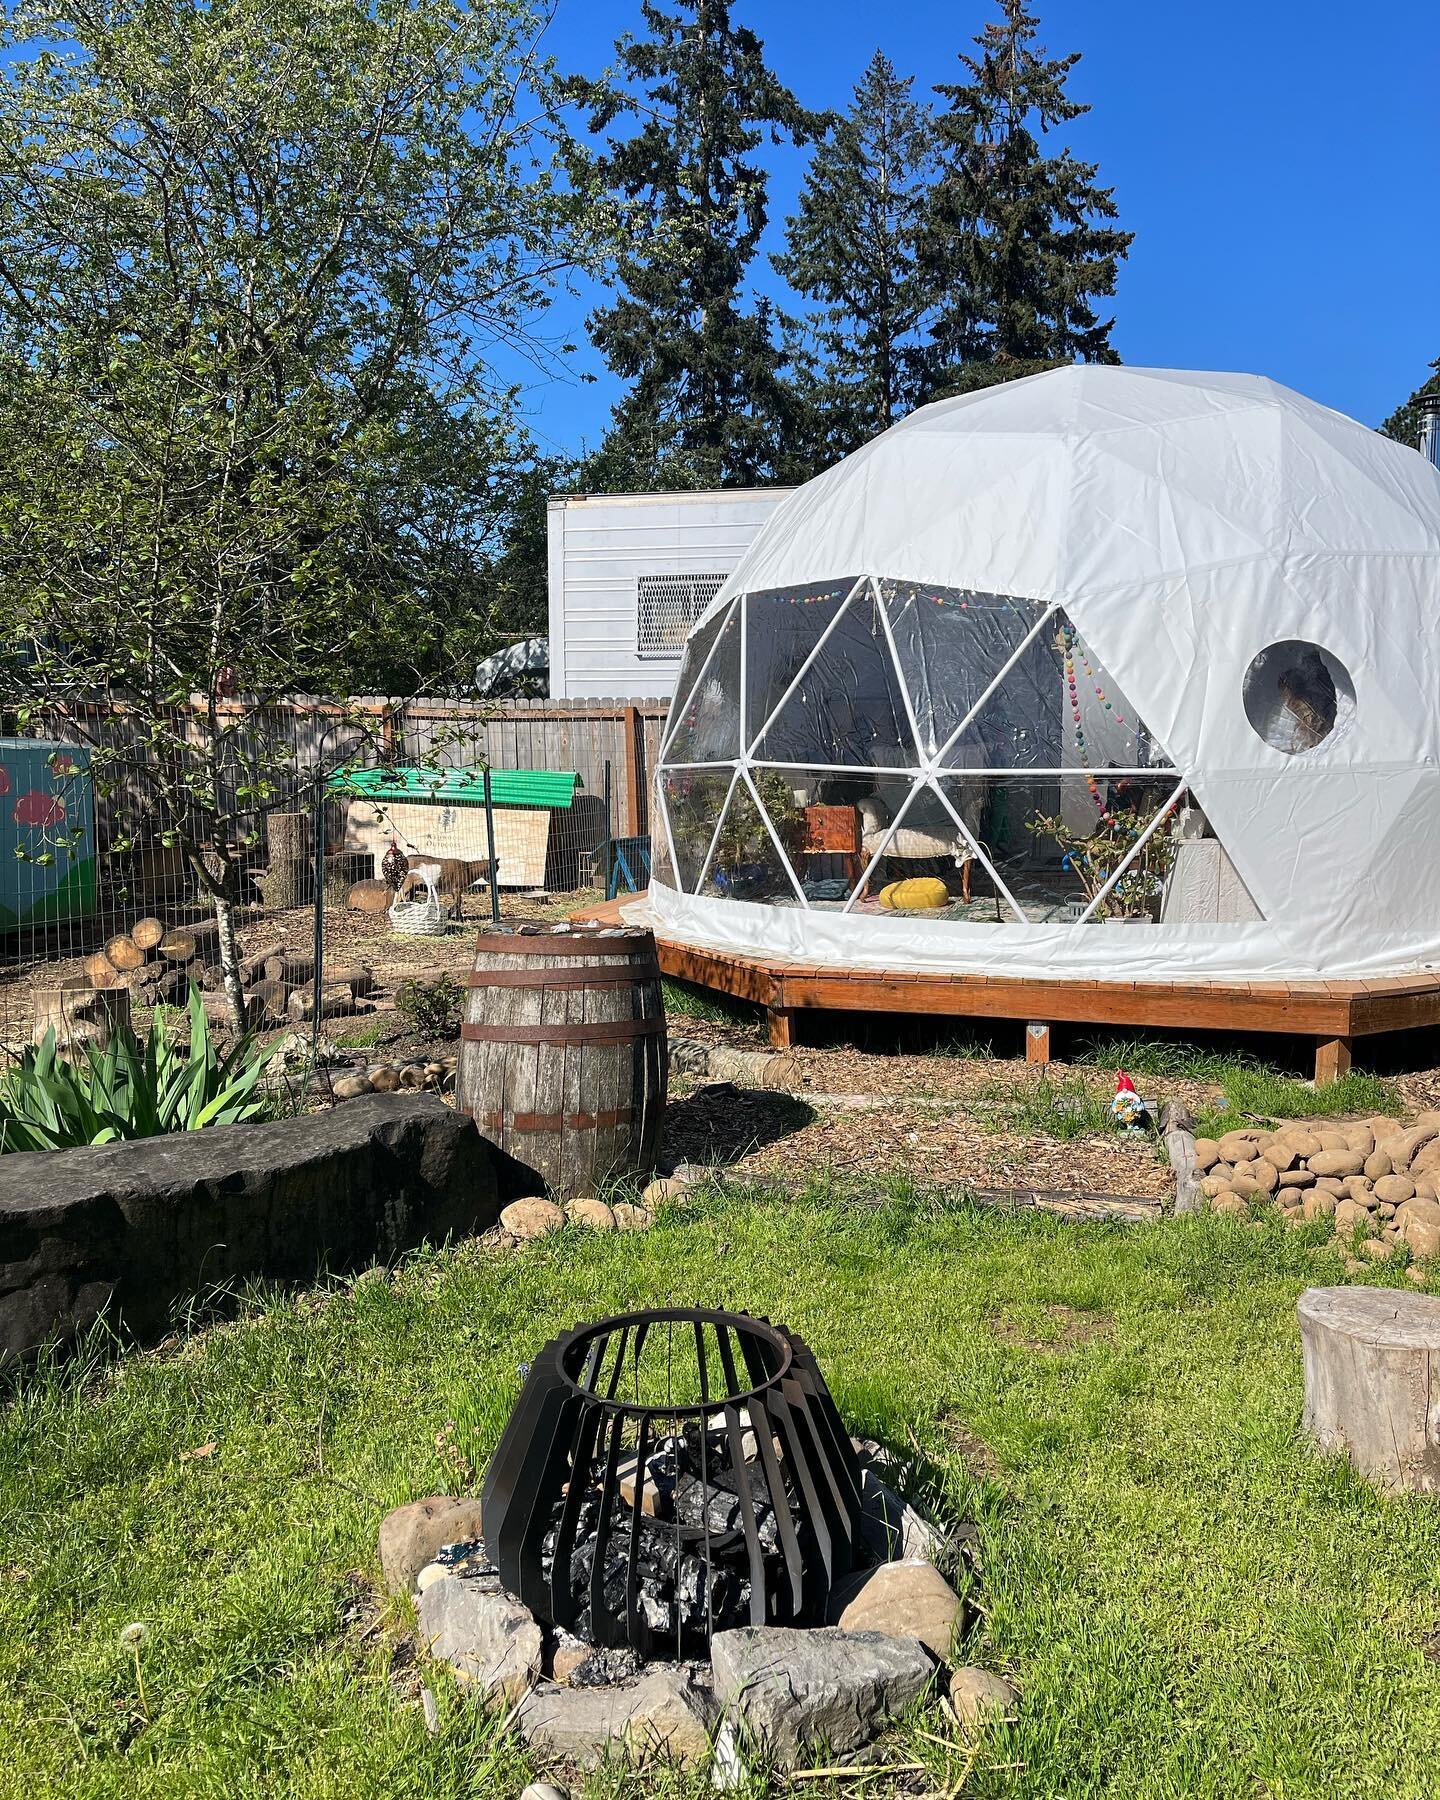 The ecotherapy backyard office! It&rsquo;s a dream come true and nourishing for my provider psyche. I got a tan &ldquo;during work&rdquo; this week. #filteringlightcounseling #neurodivergenttherapy #hardwork